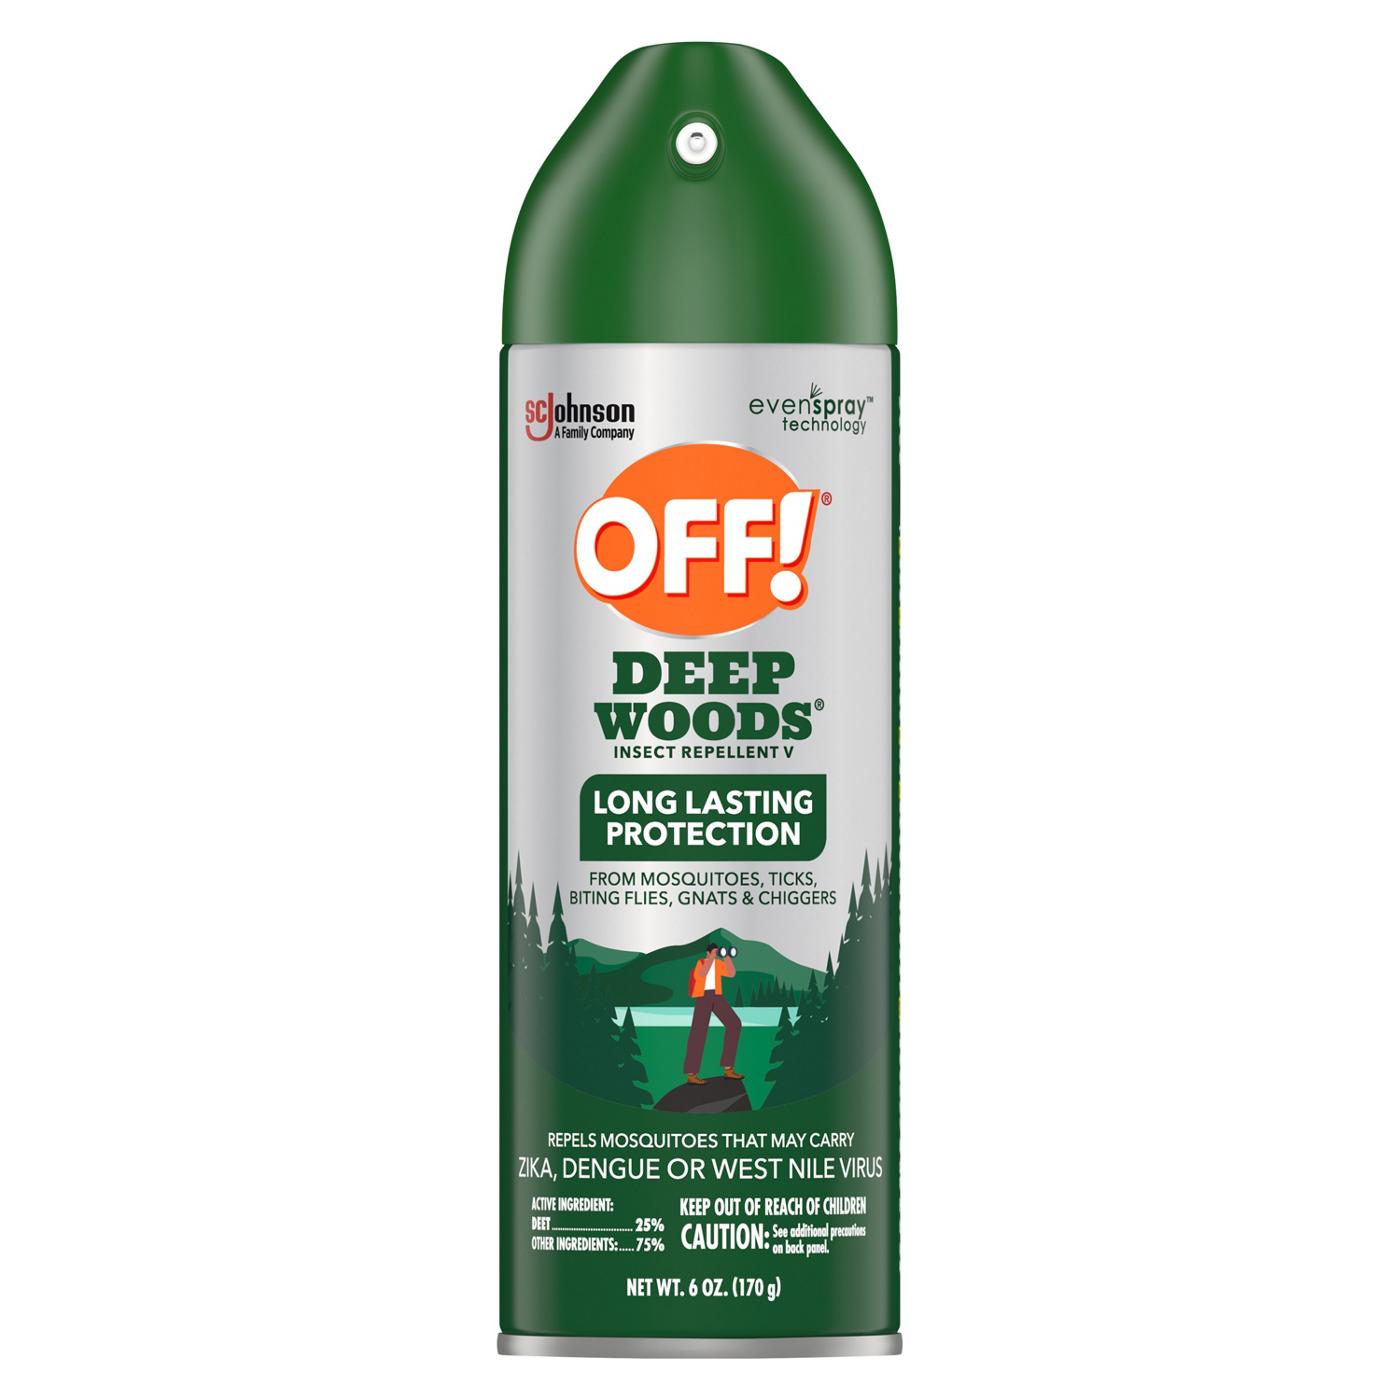 Off! Deep Woods Insect Repellent V; image 1 of 2